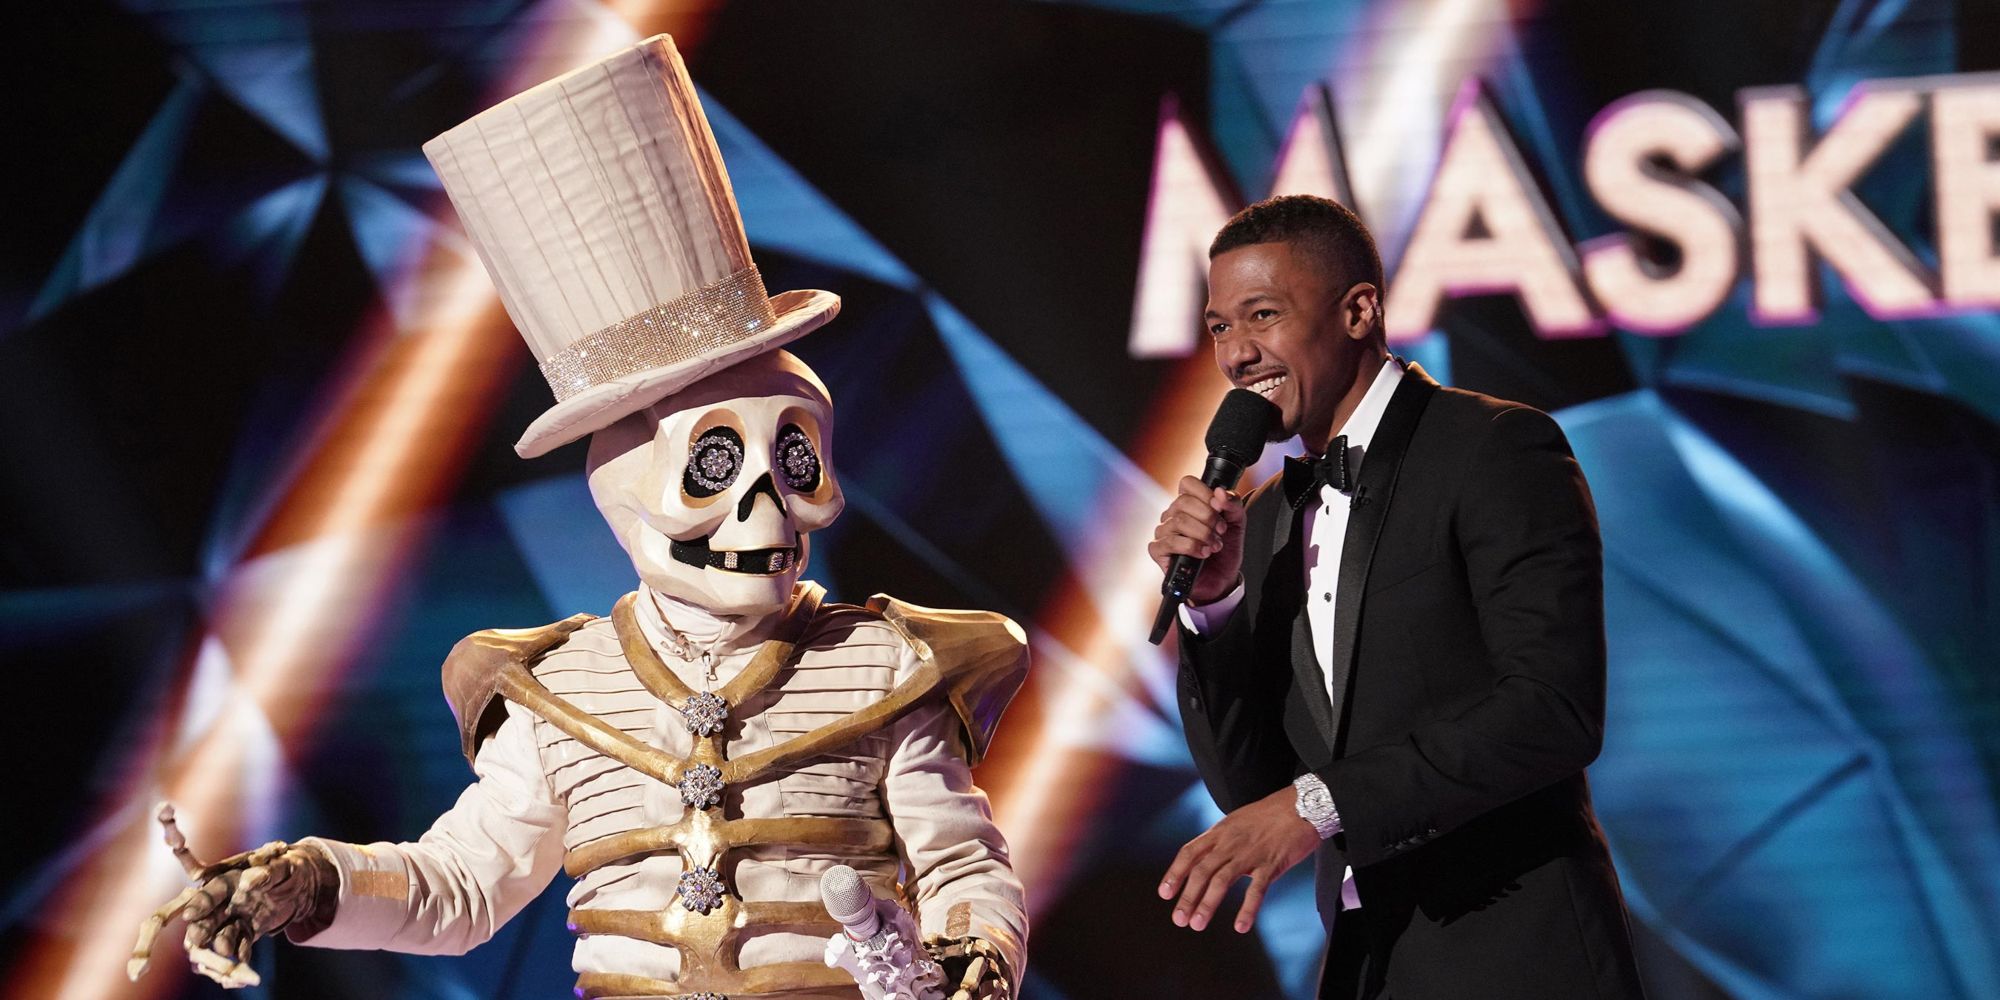 The Masked Singer Season 2 The Skeleton standing next to the host